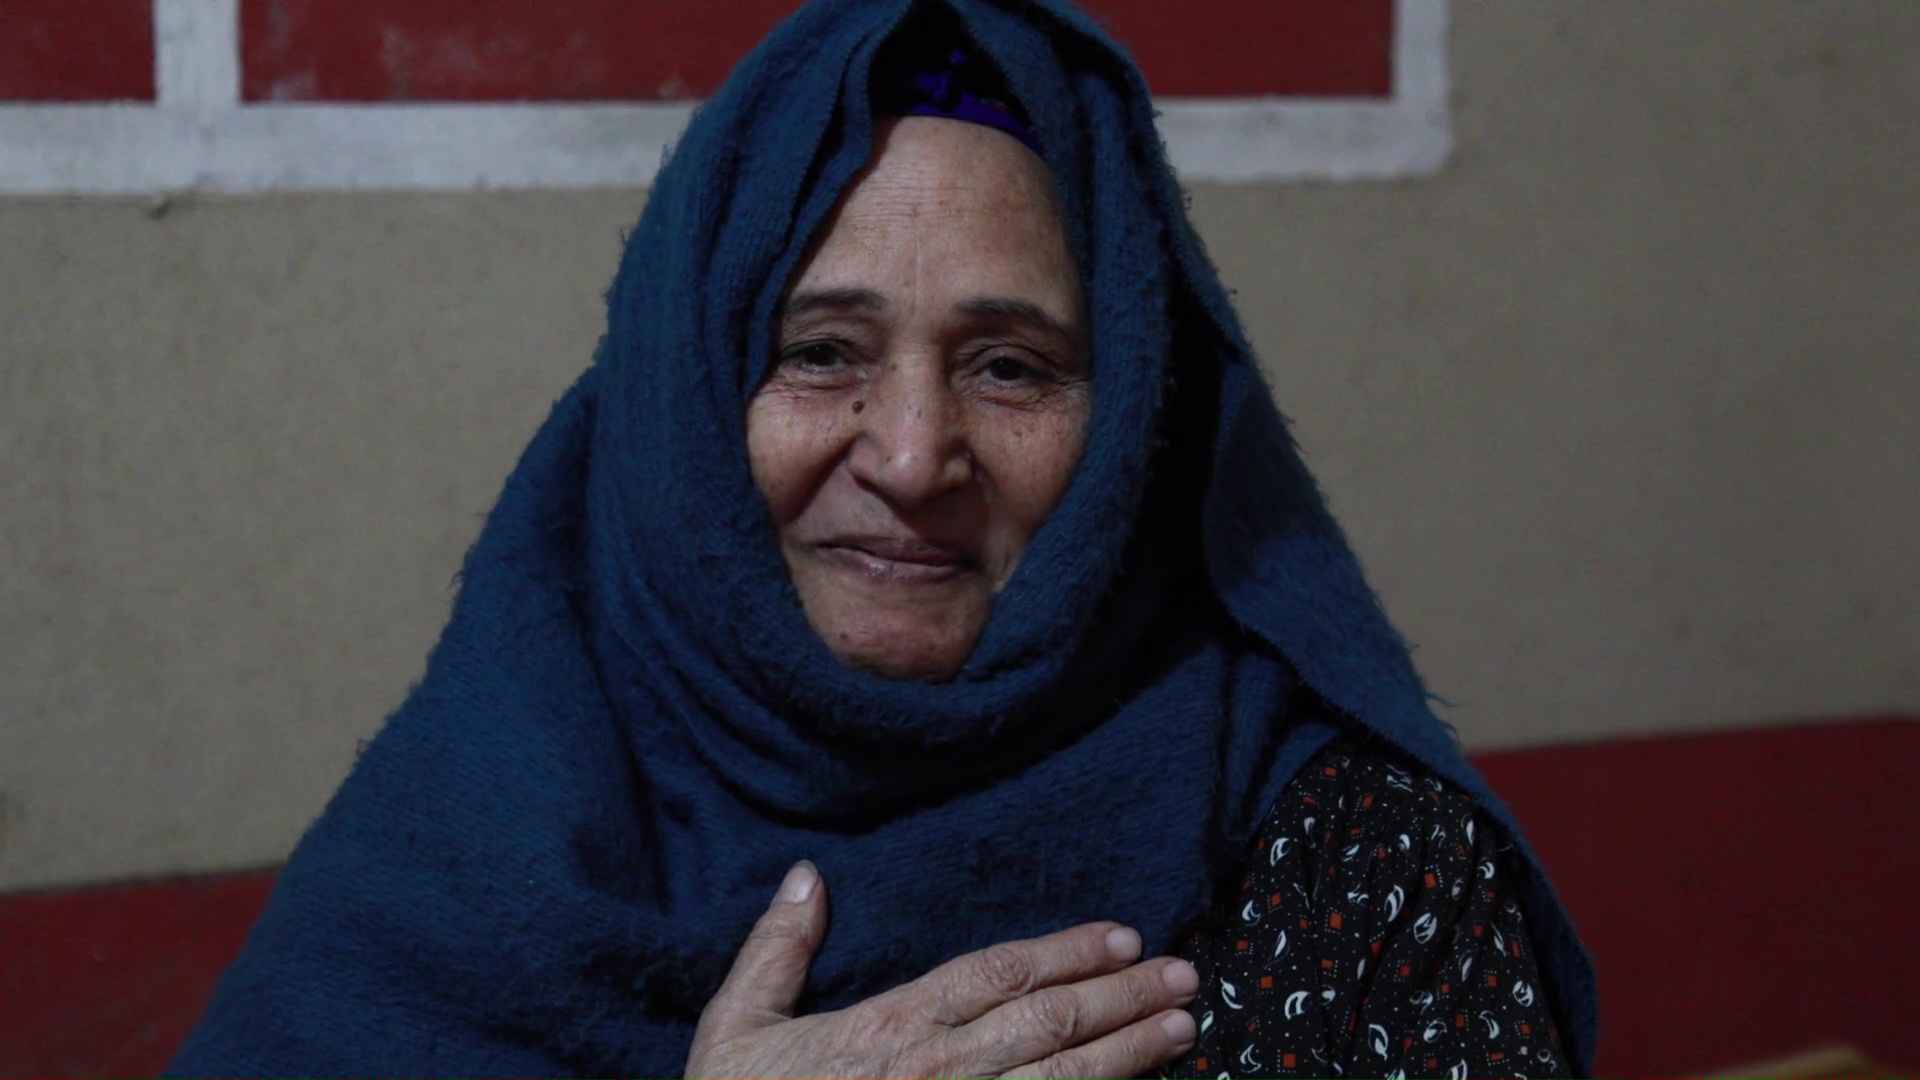 Help The Persecuted empowers Egypt Christians with opportunities